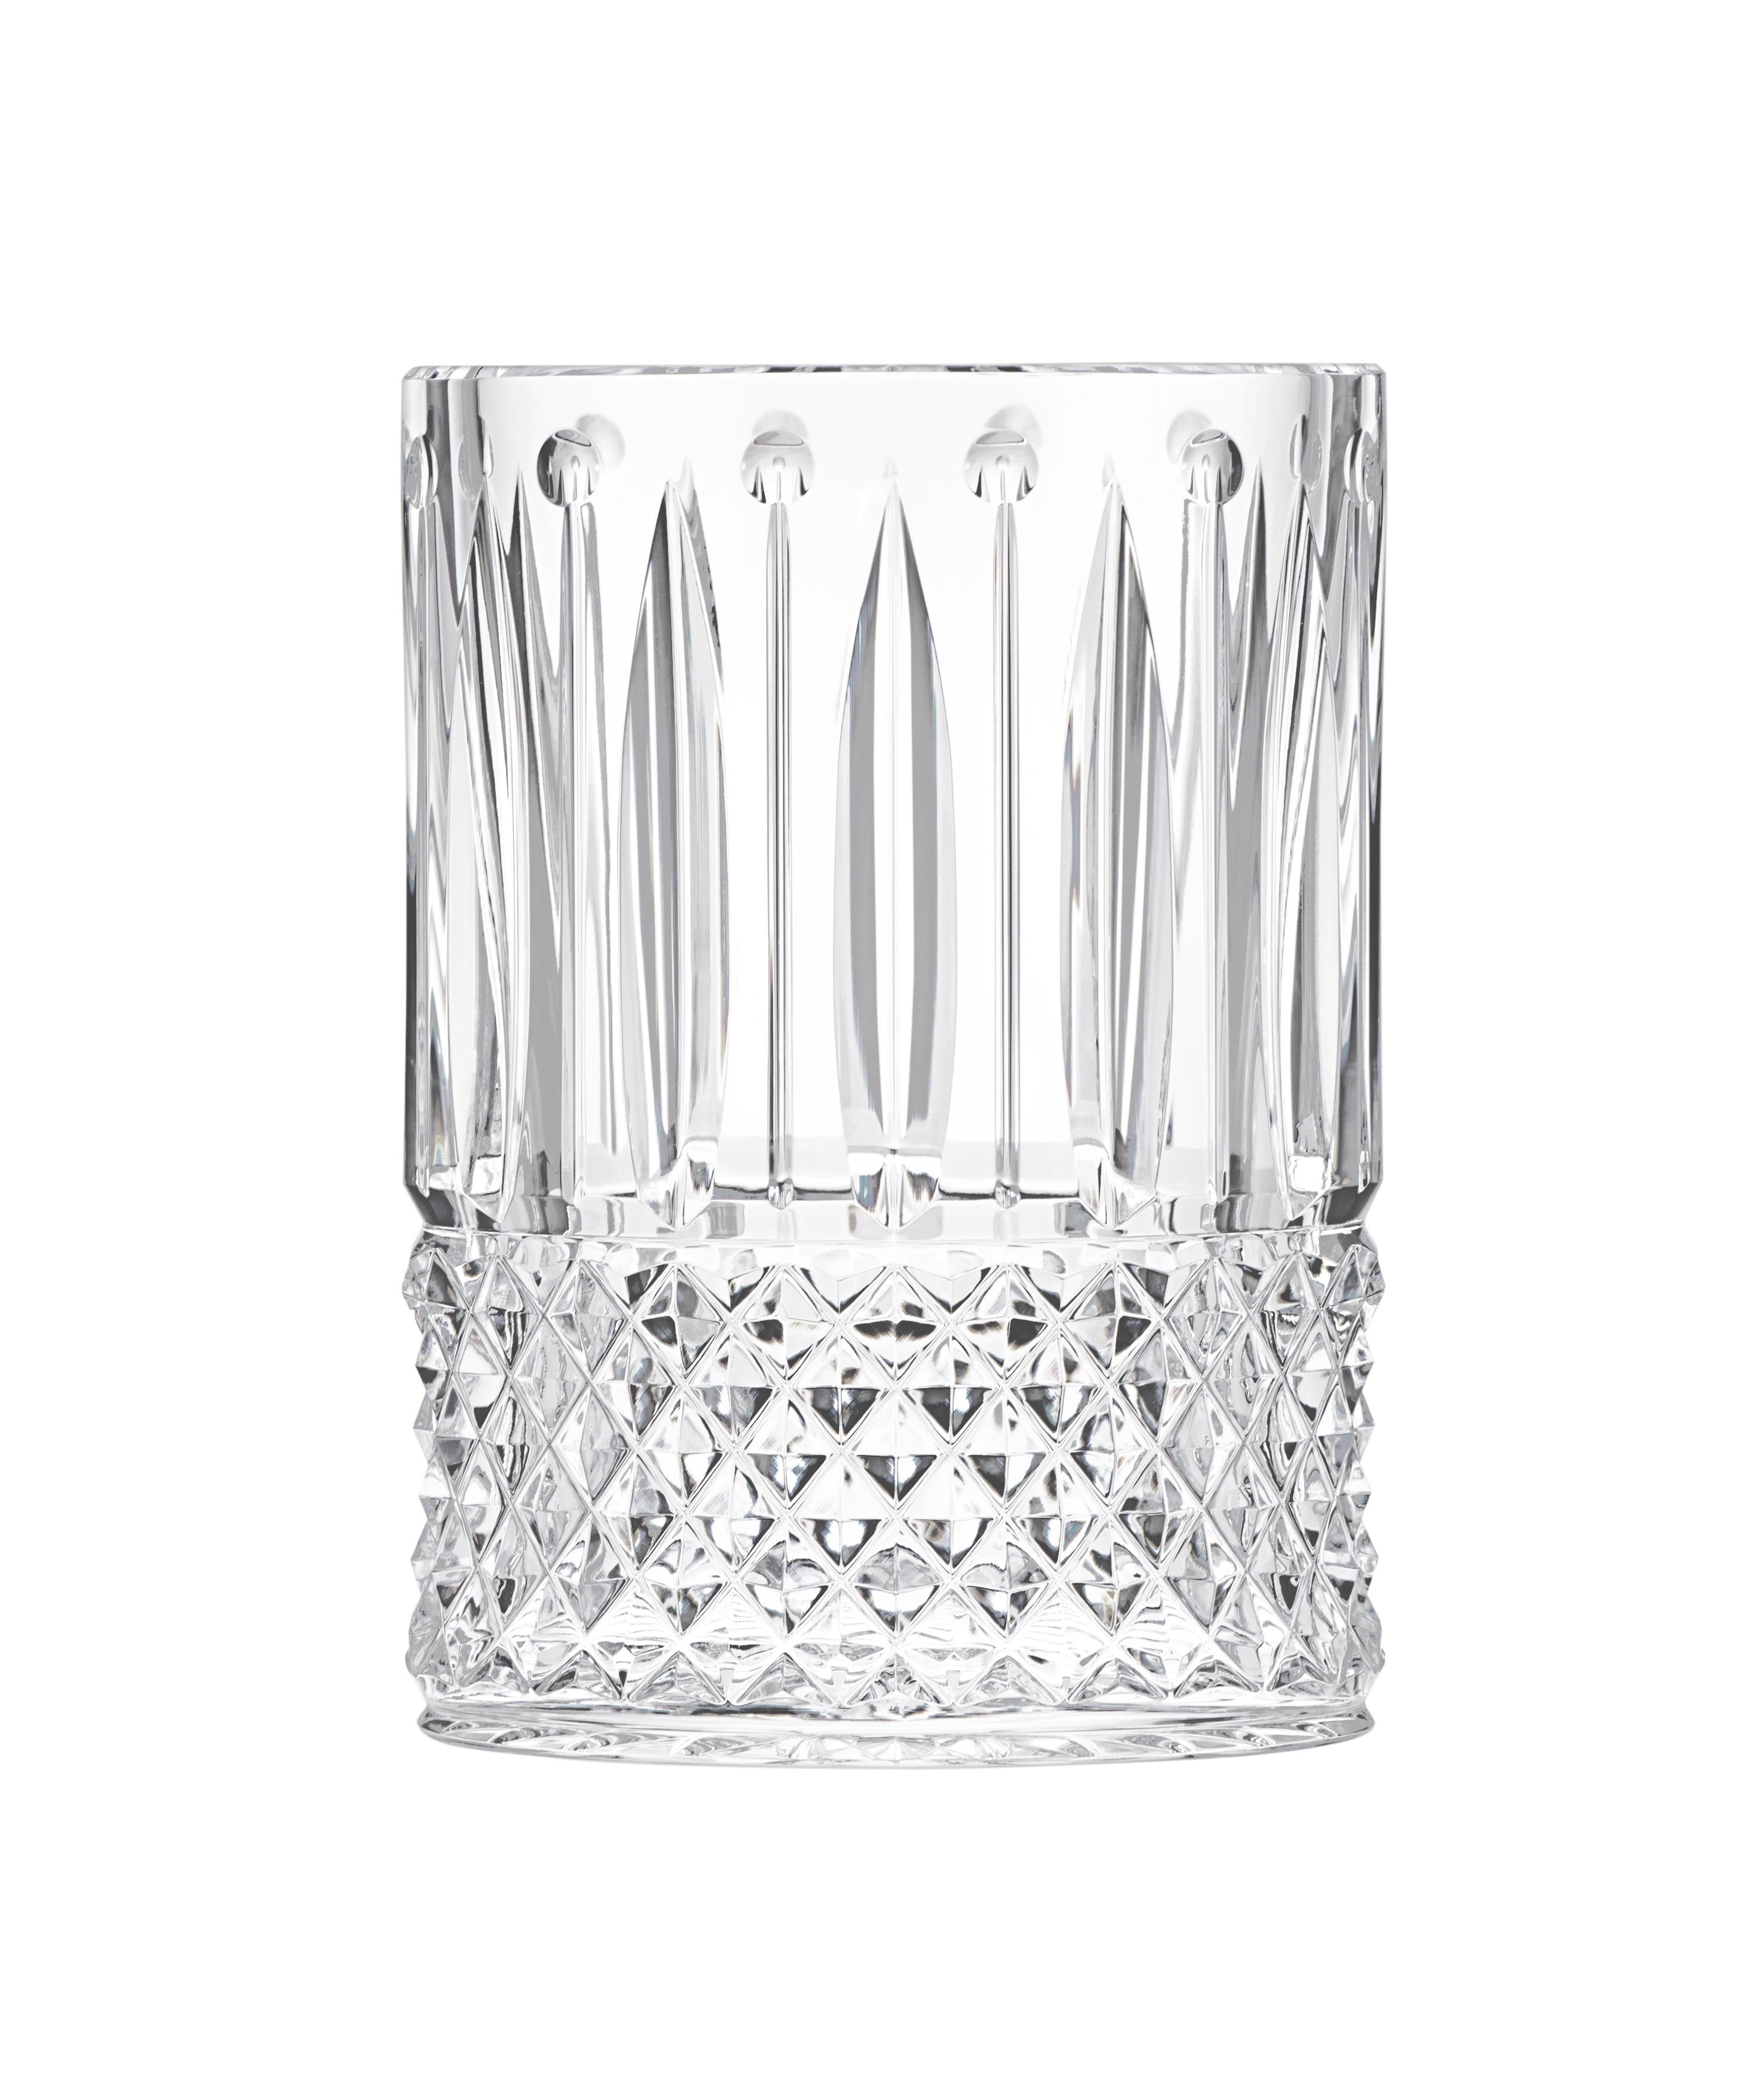 Saint-Louis is the oldest crystal manufacturer in Europe, originating in Lorraine, France and founded in 1586. Designed in 1928, the Tommy service made an impression in 1938 during an exceptional lunch held in Versailles. Over two hundred guests